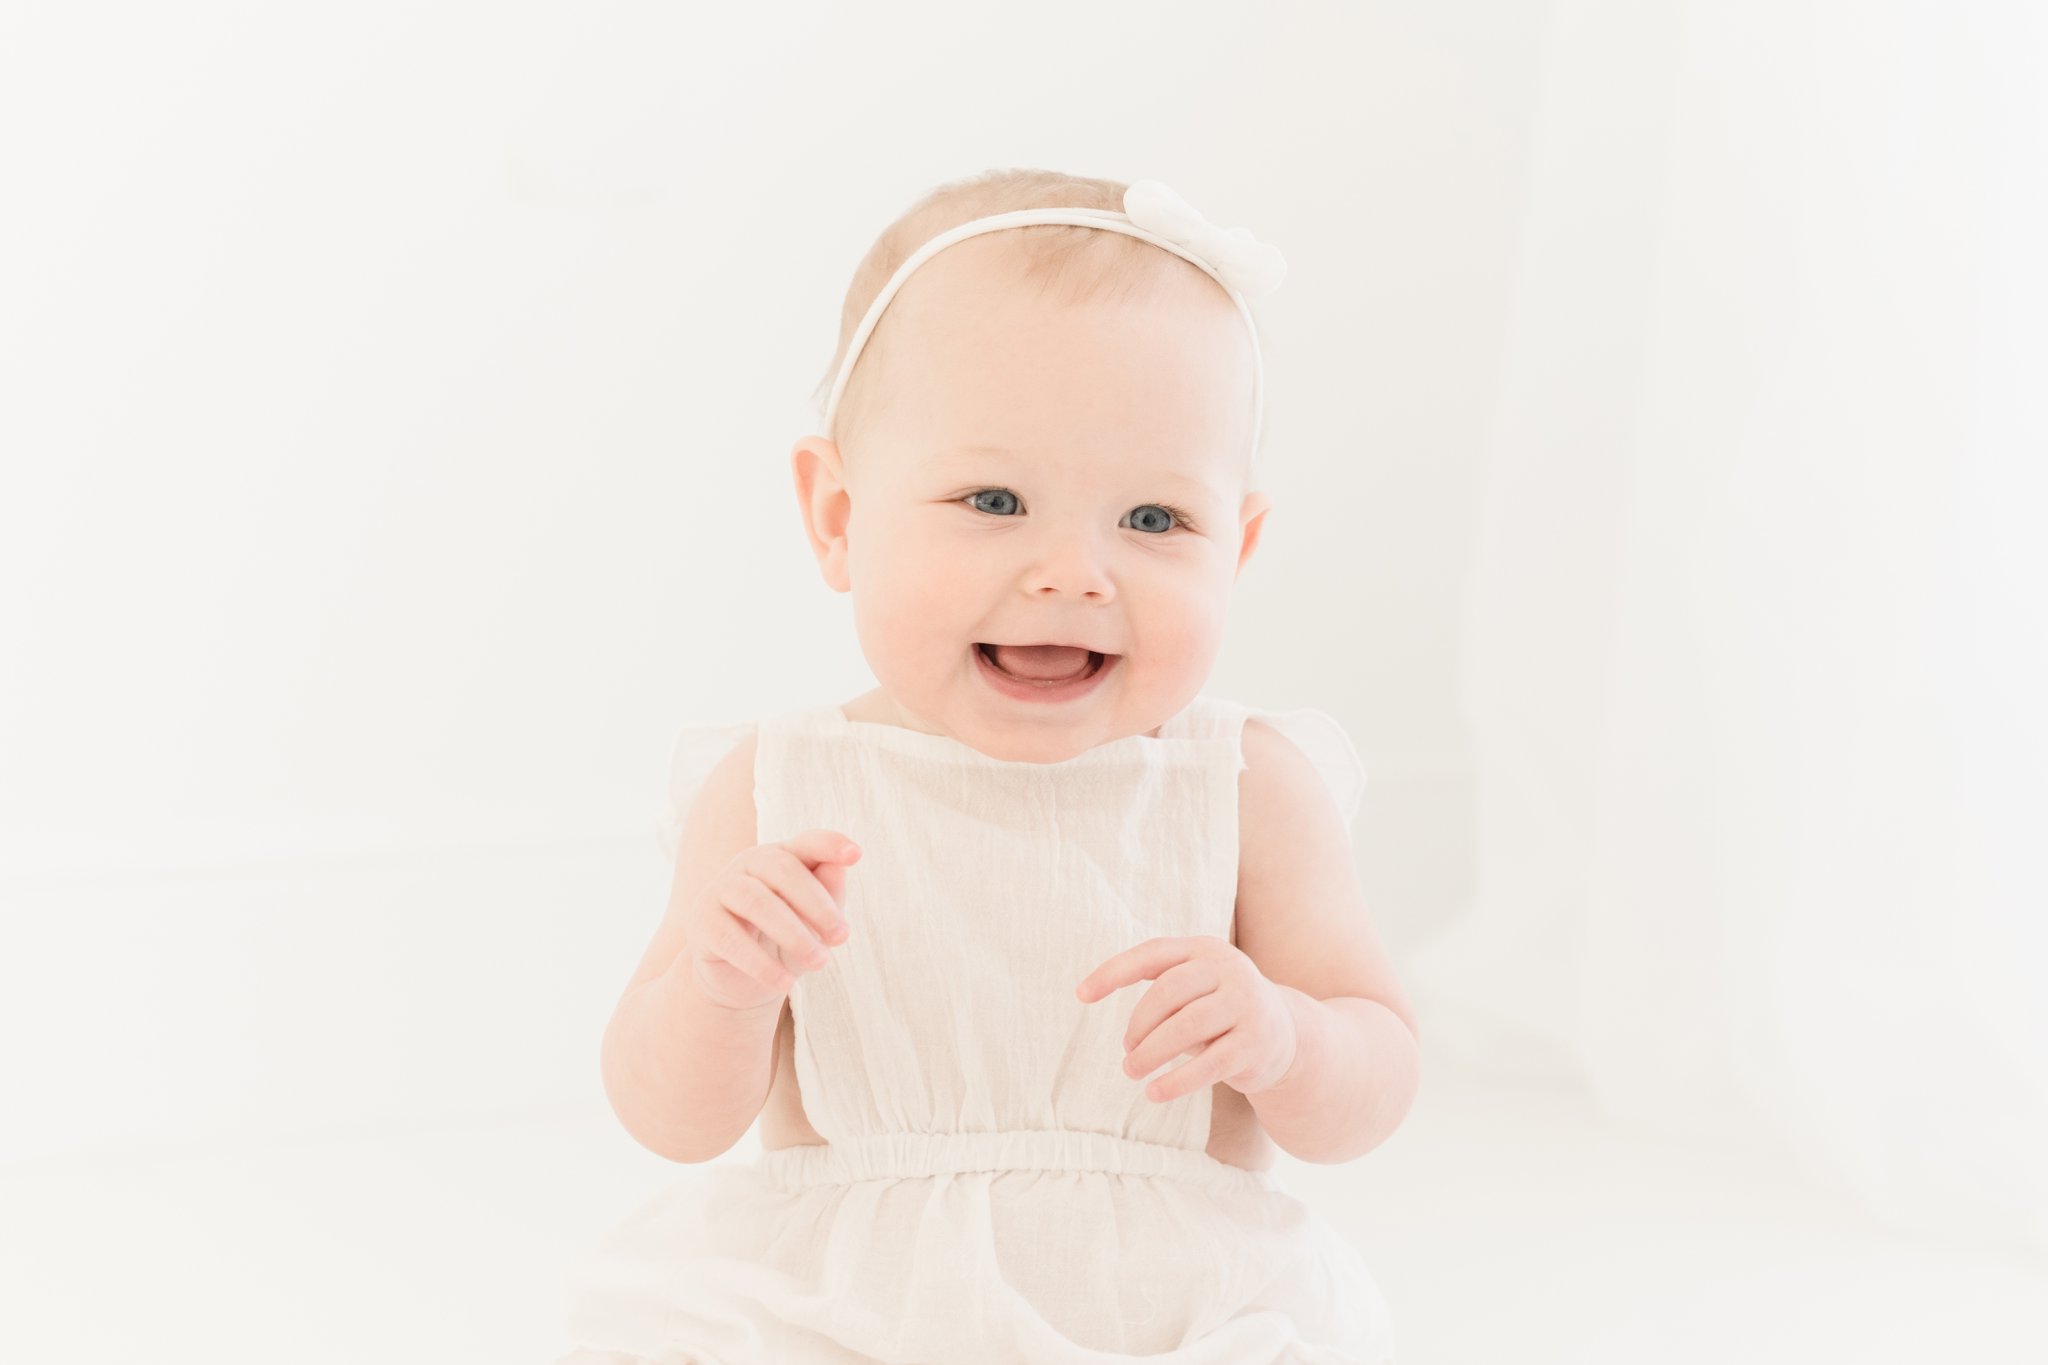 Baby girl being photographed in photography studio.